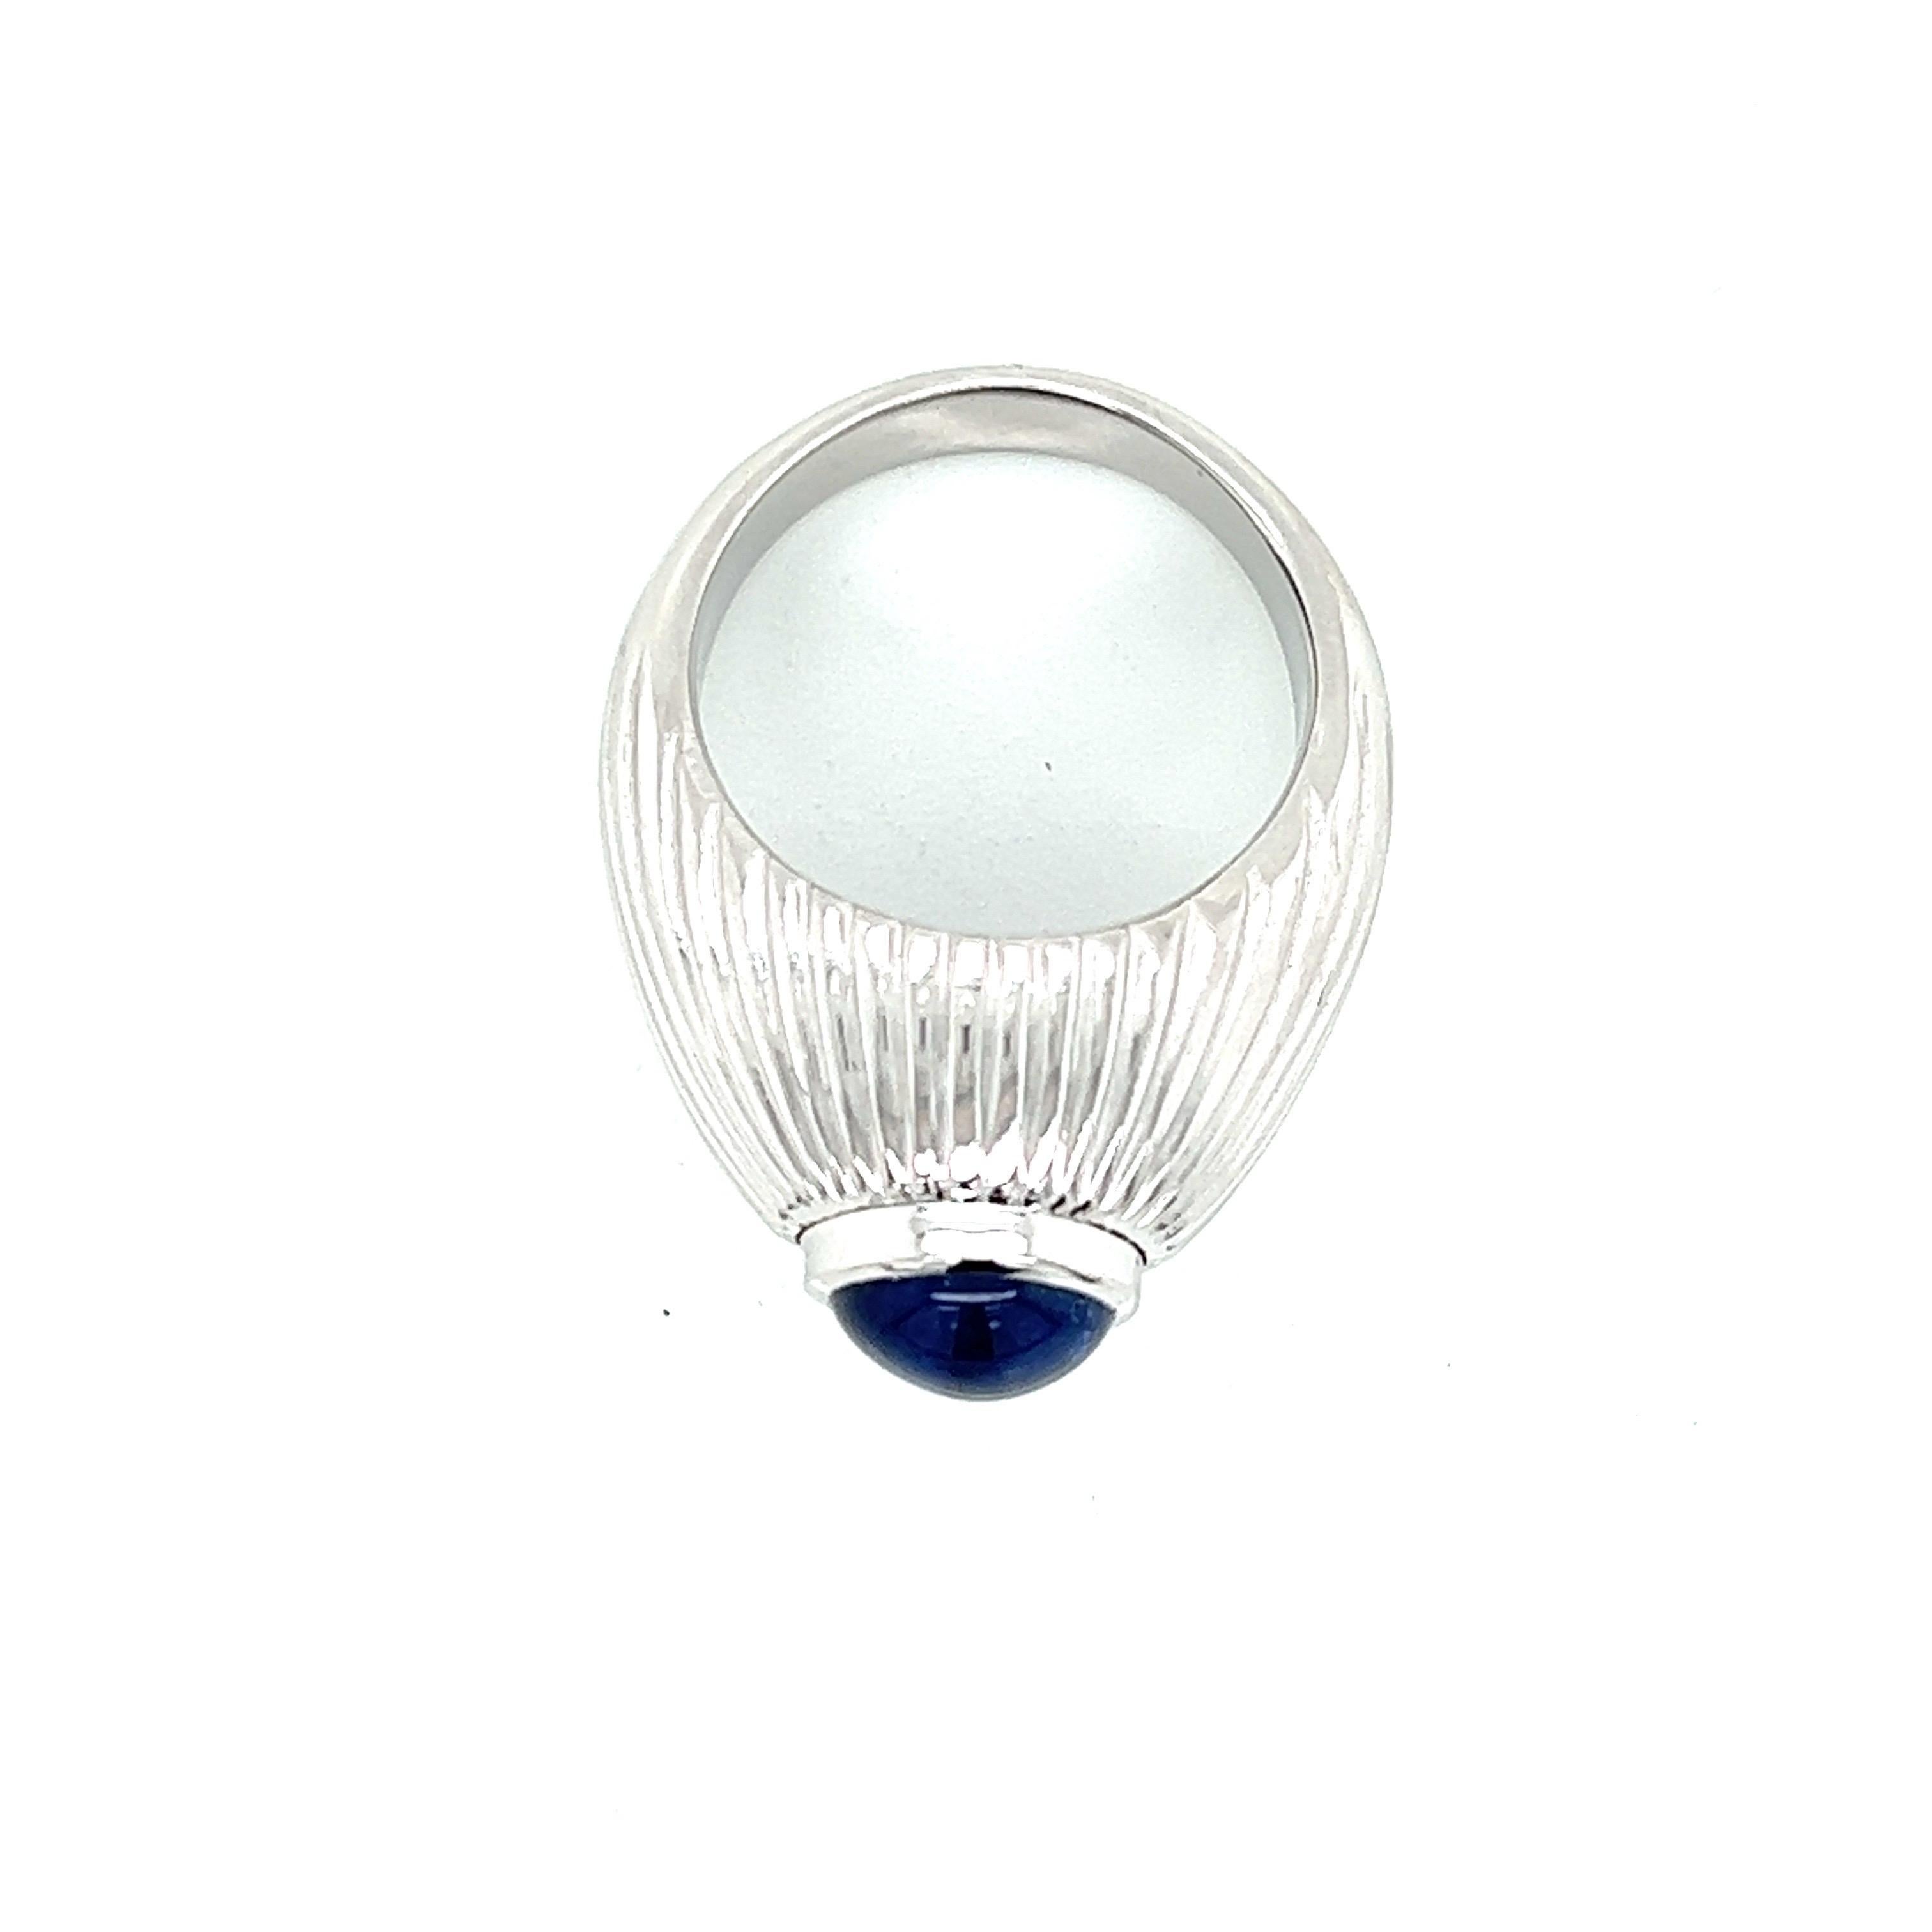 18k White Gold and Approx. 3.5ct Cabochon Sapphire Gents Ring For Sale 1